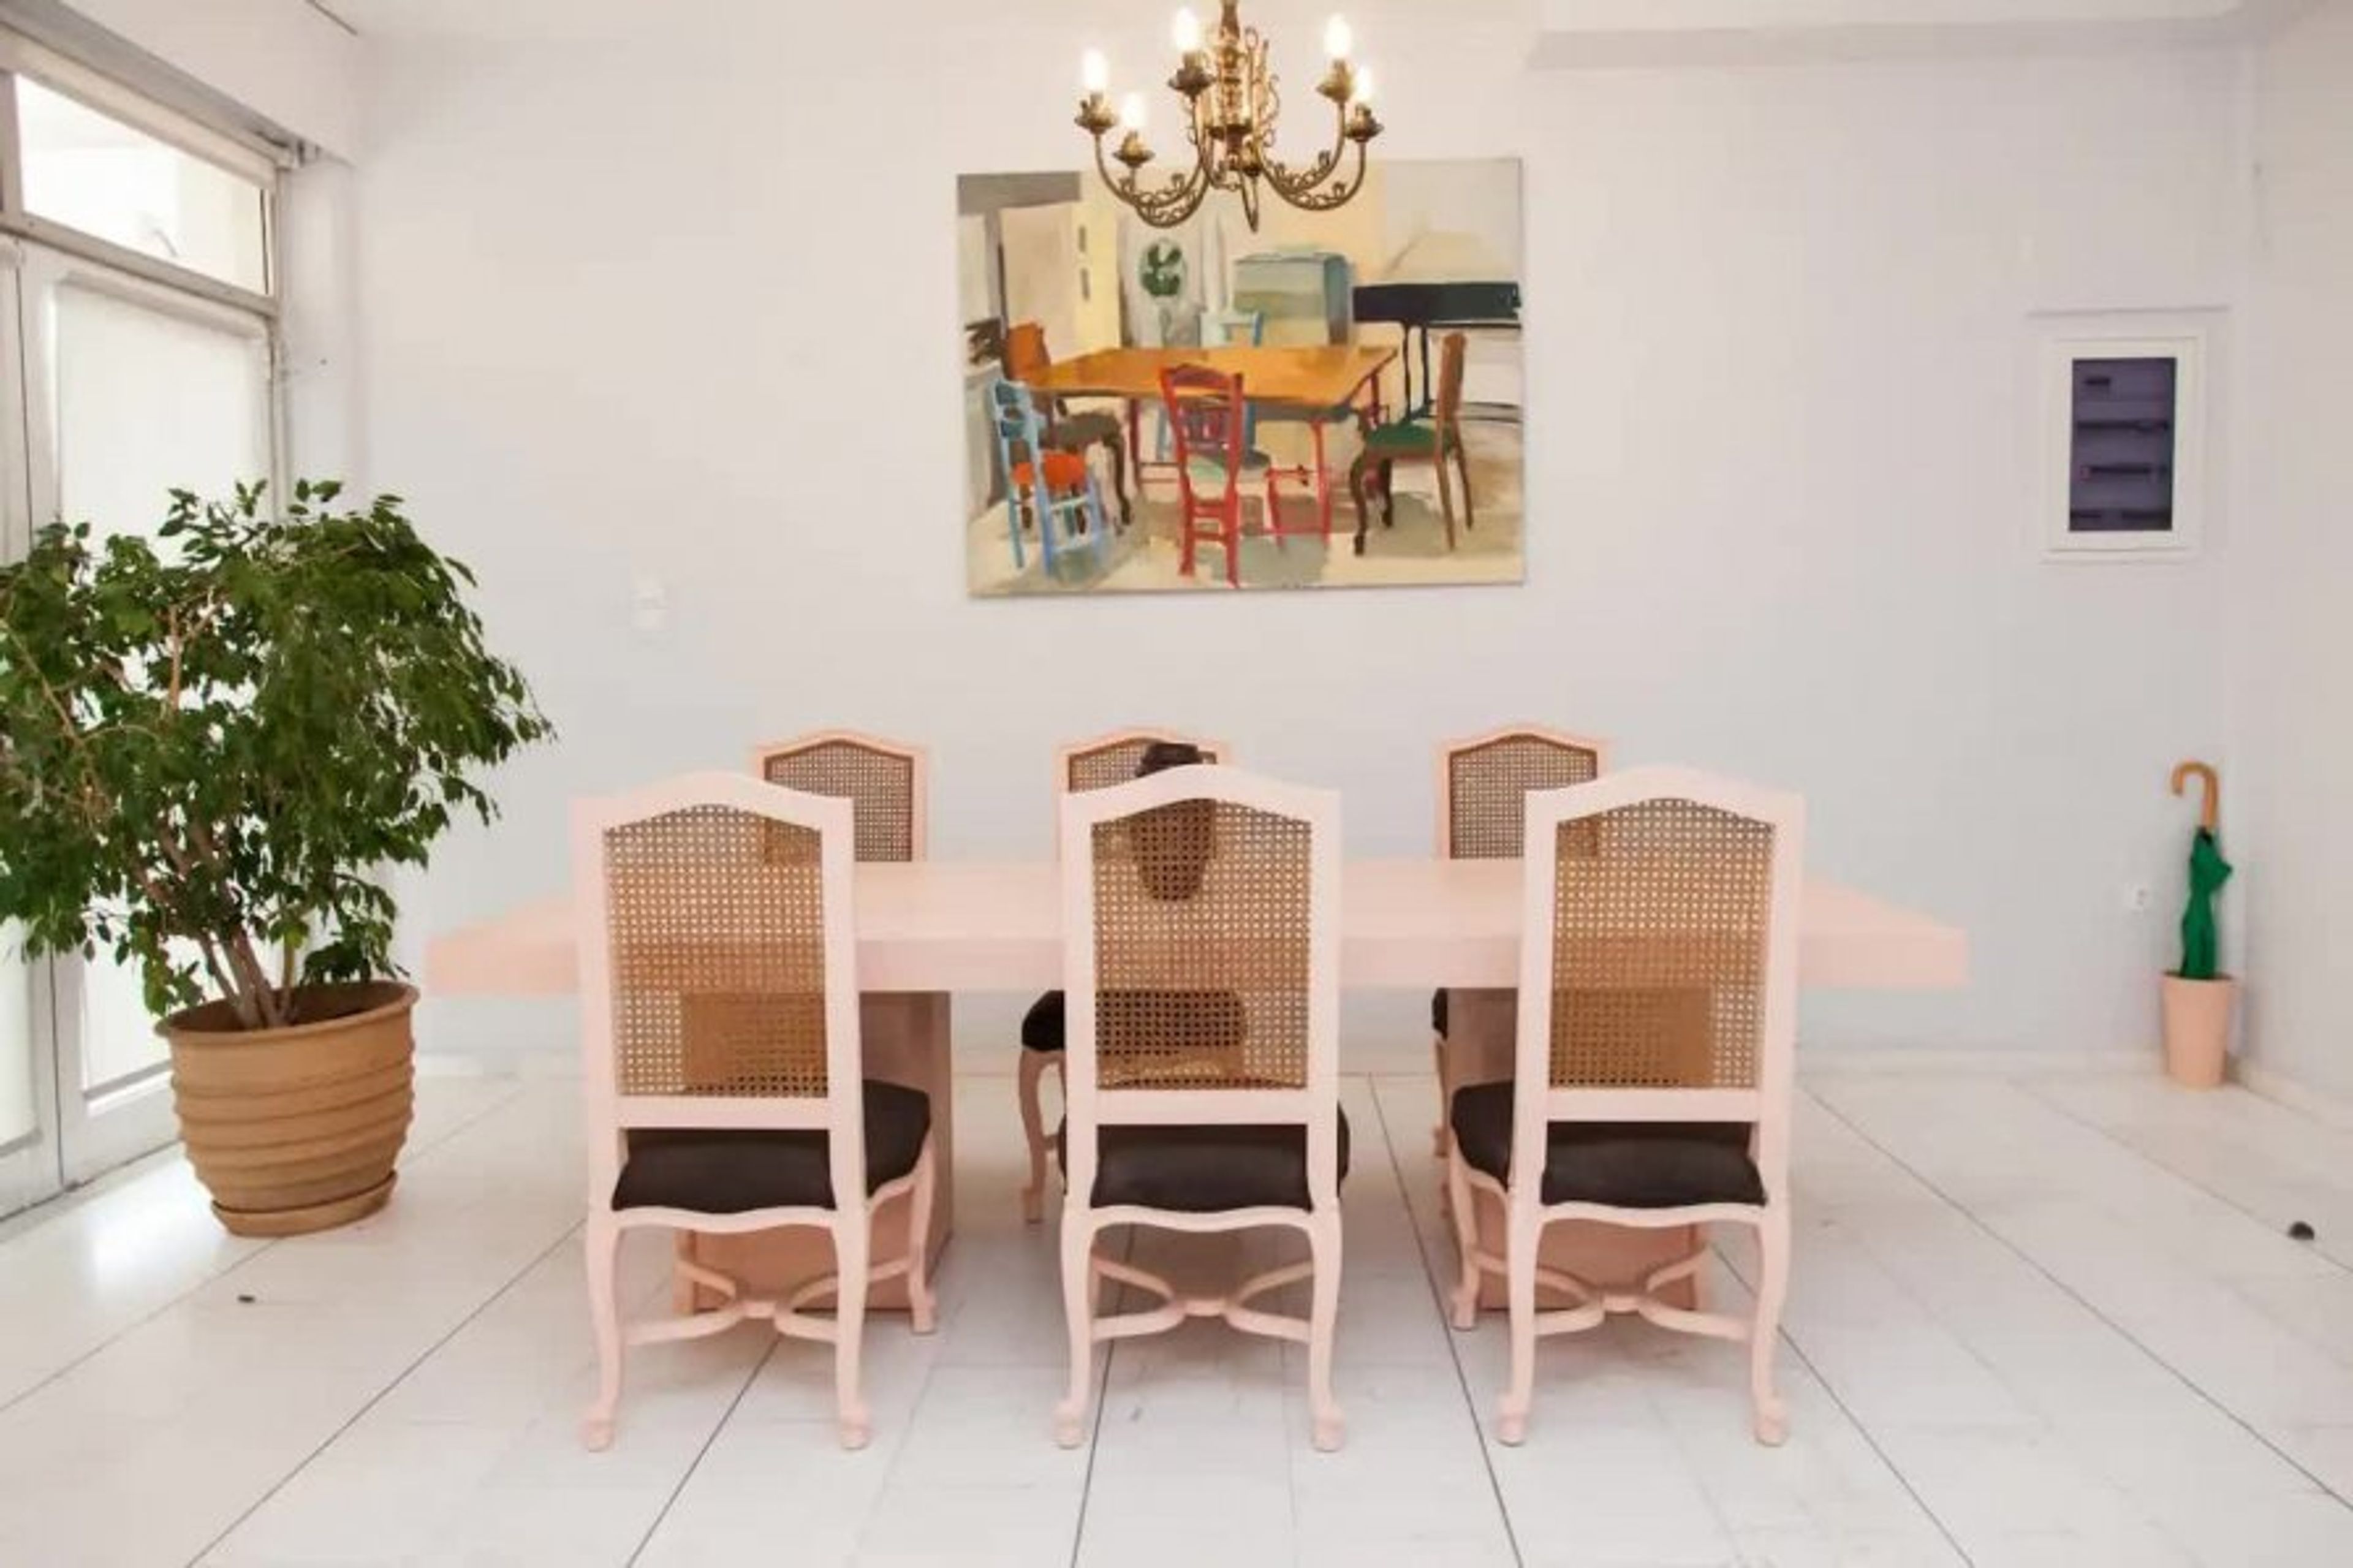 Large dining table seats 8 people with instagammable greek painting 